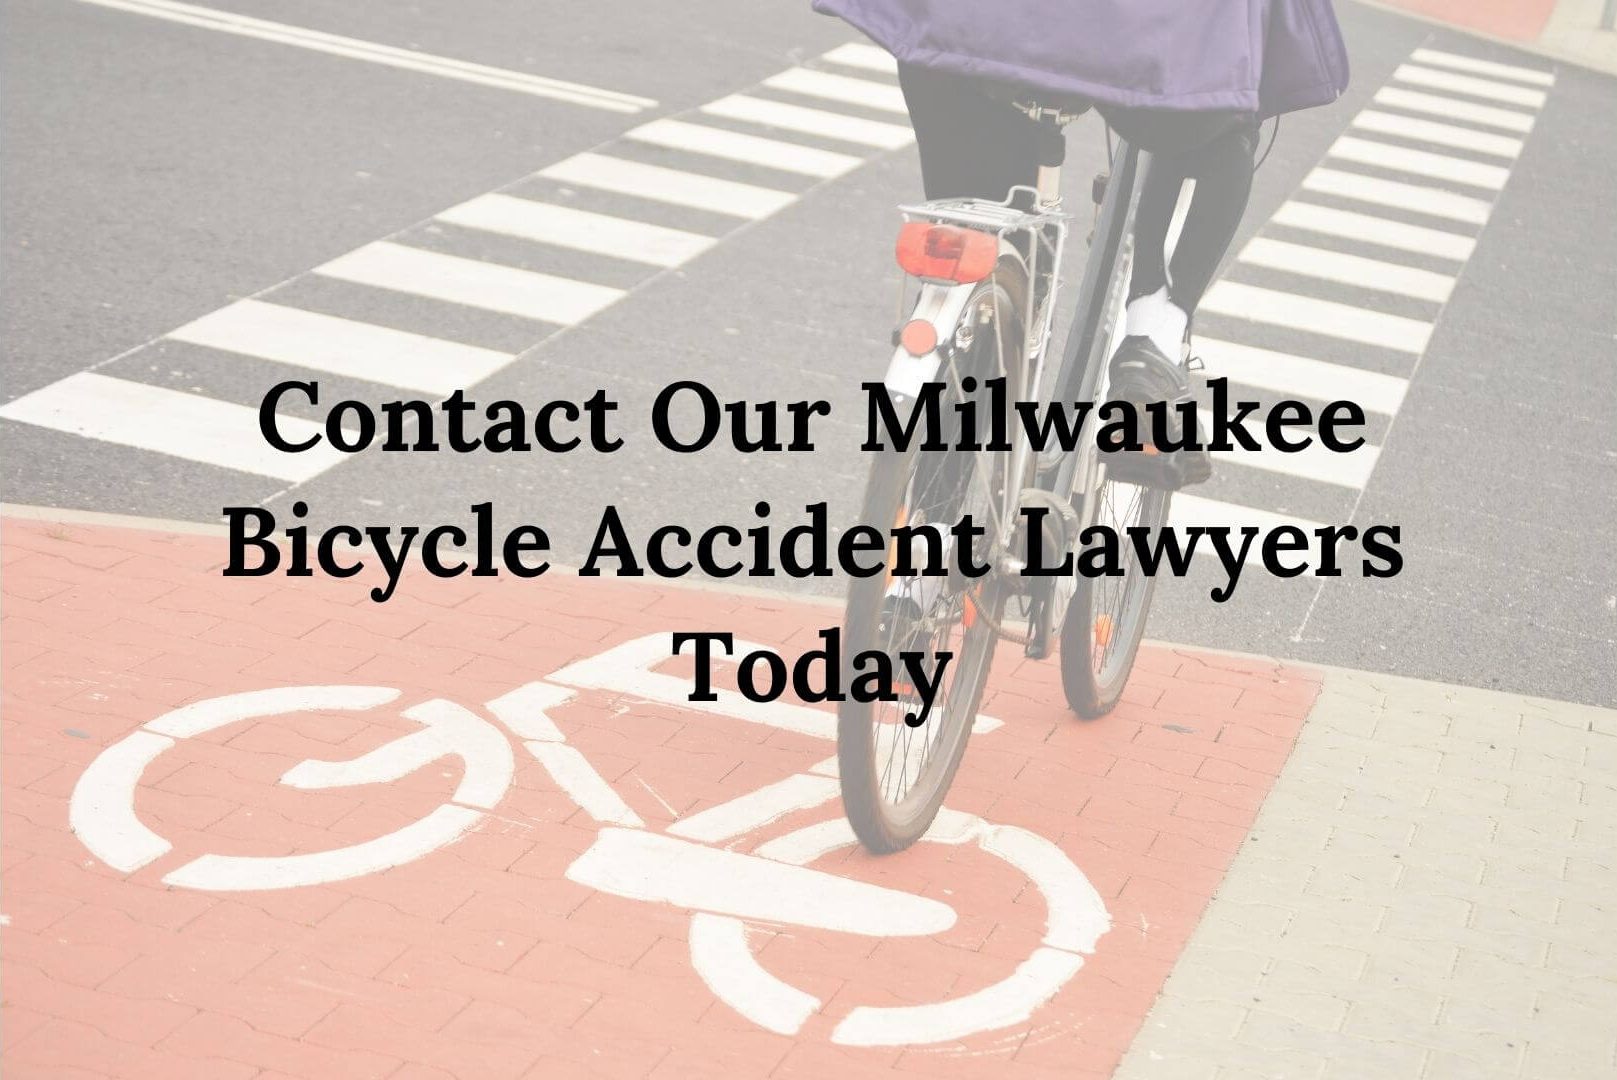 contact our Milwaukee bicycle accident lawyers today